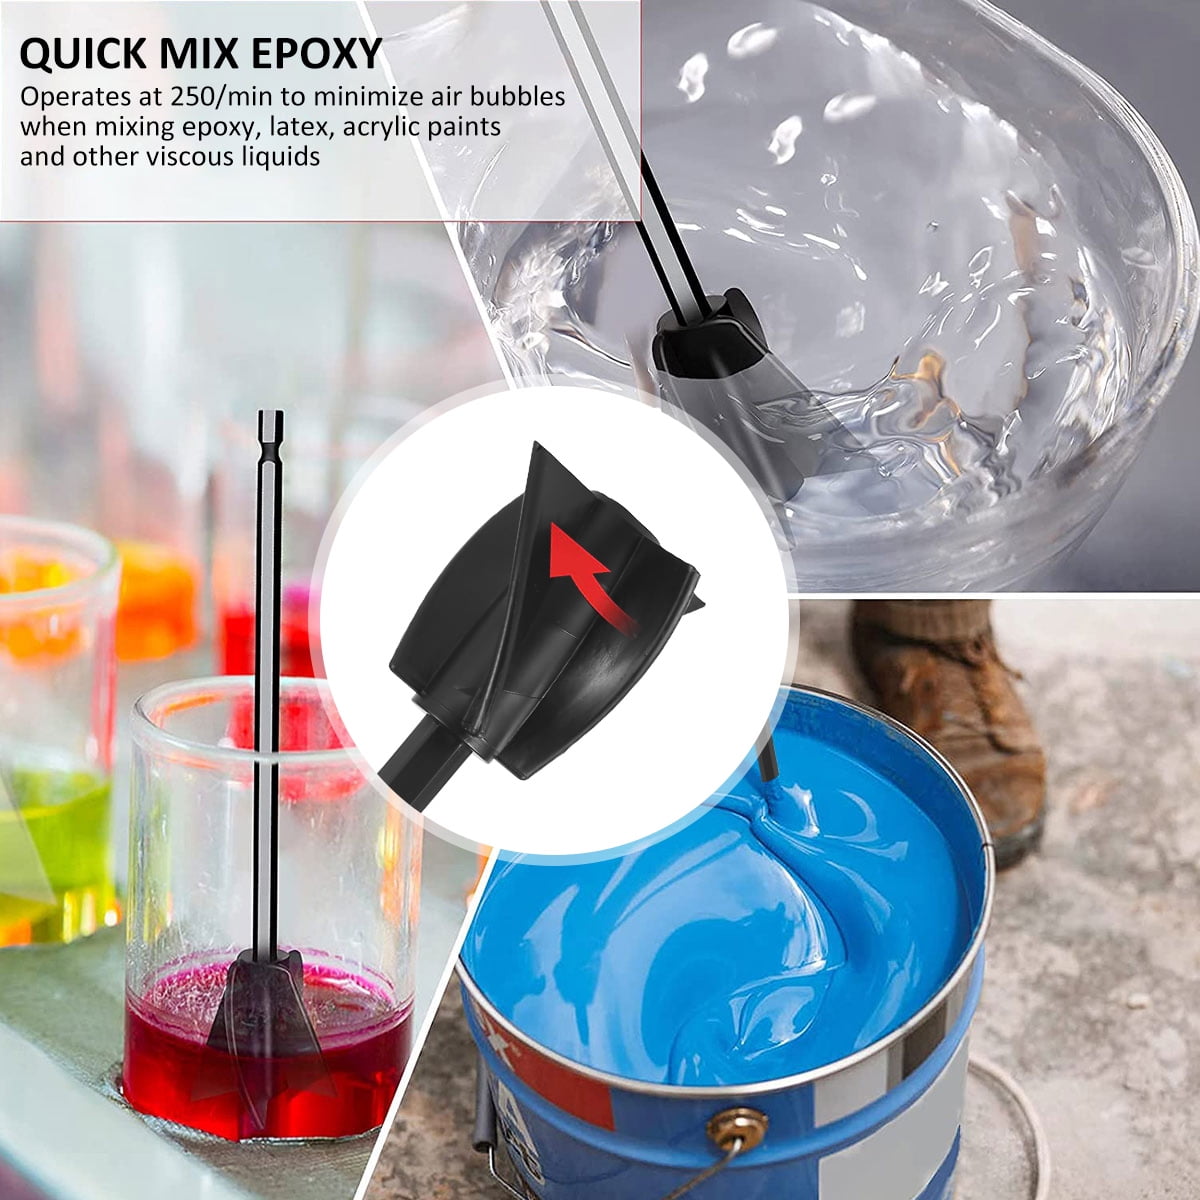 JDiction Resin Mixer and Polisher - Handheld Rechargeable Epoxy Resin Mixer for Minimizing Bubbles, Resin Stirrer for Resin, Silicone Mi